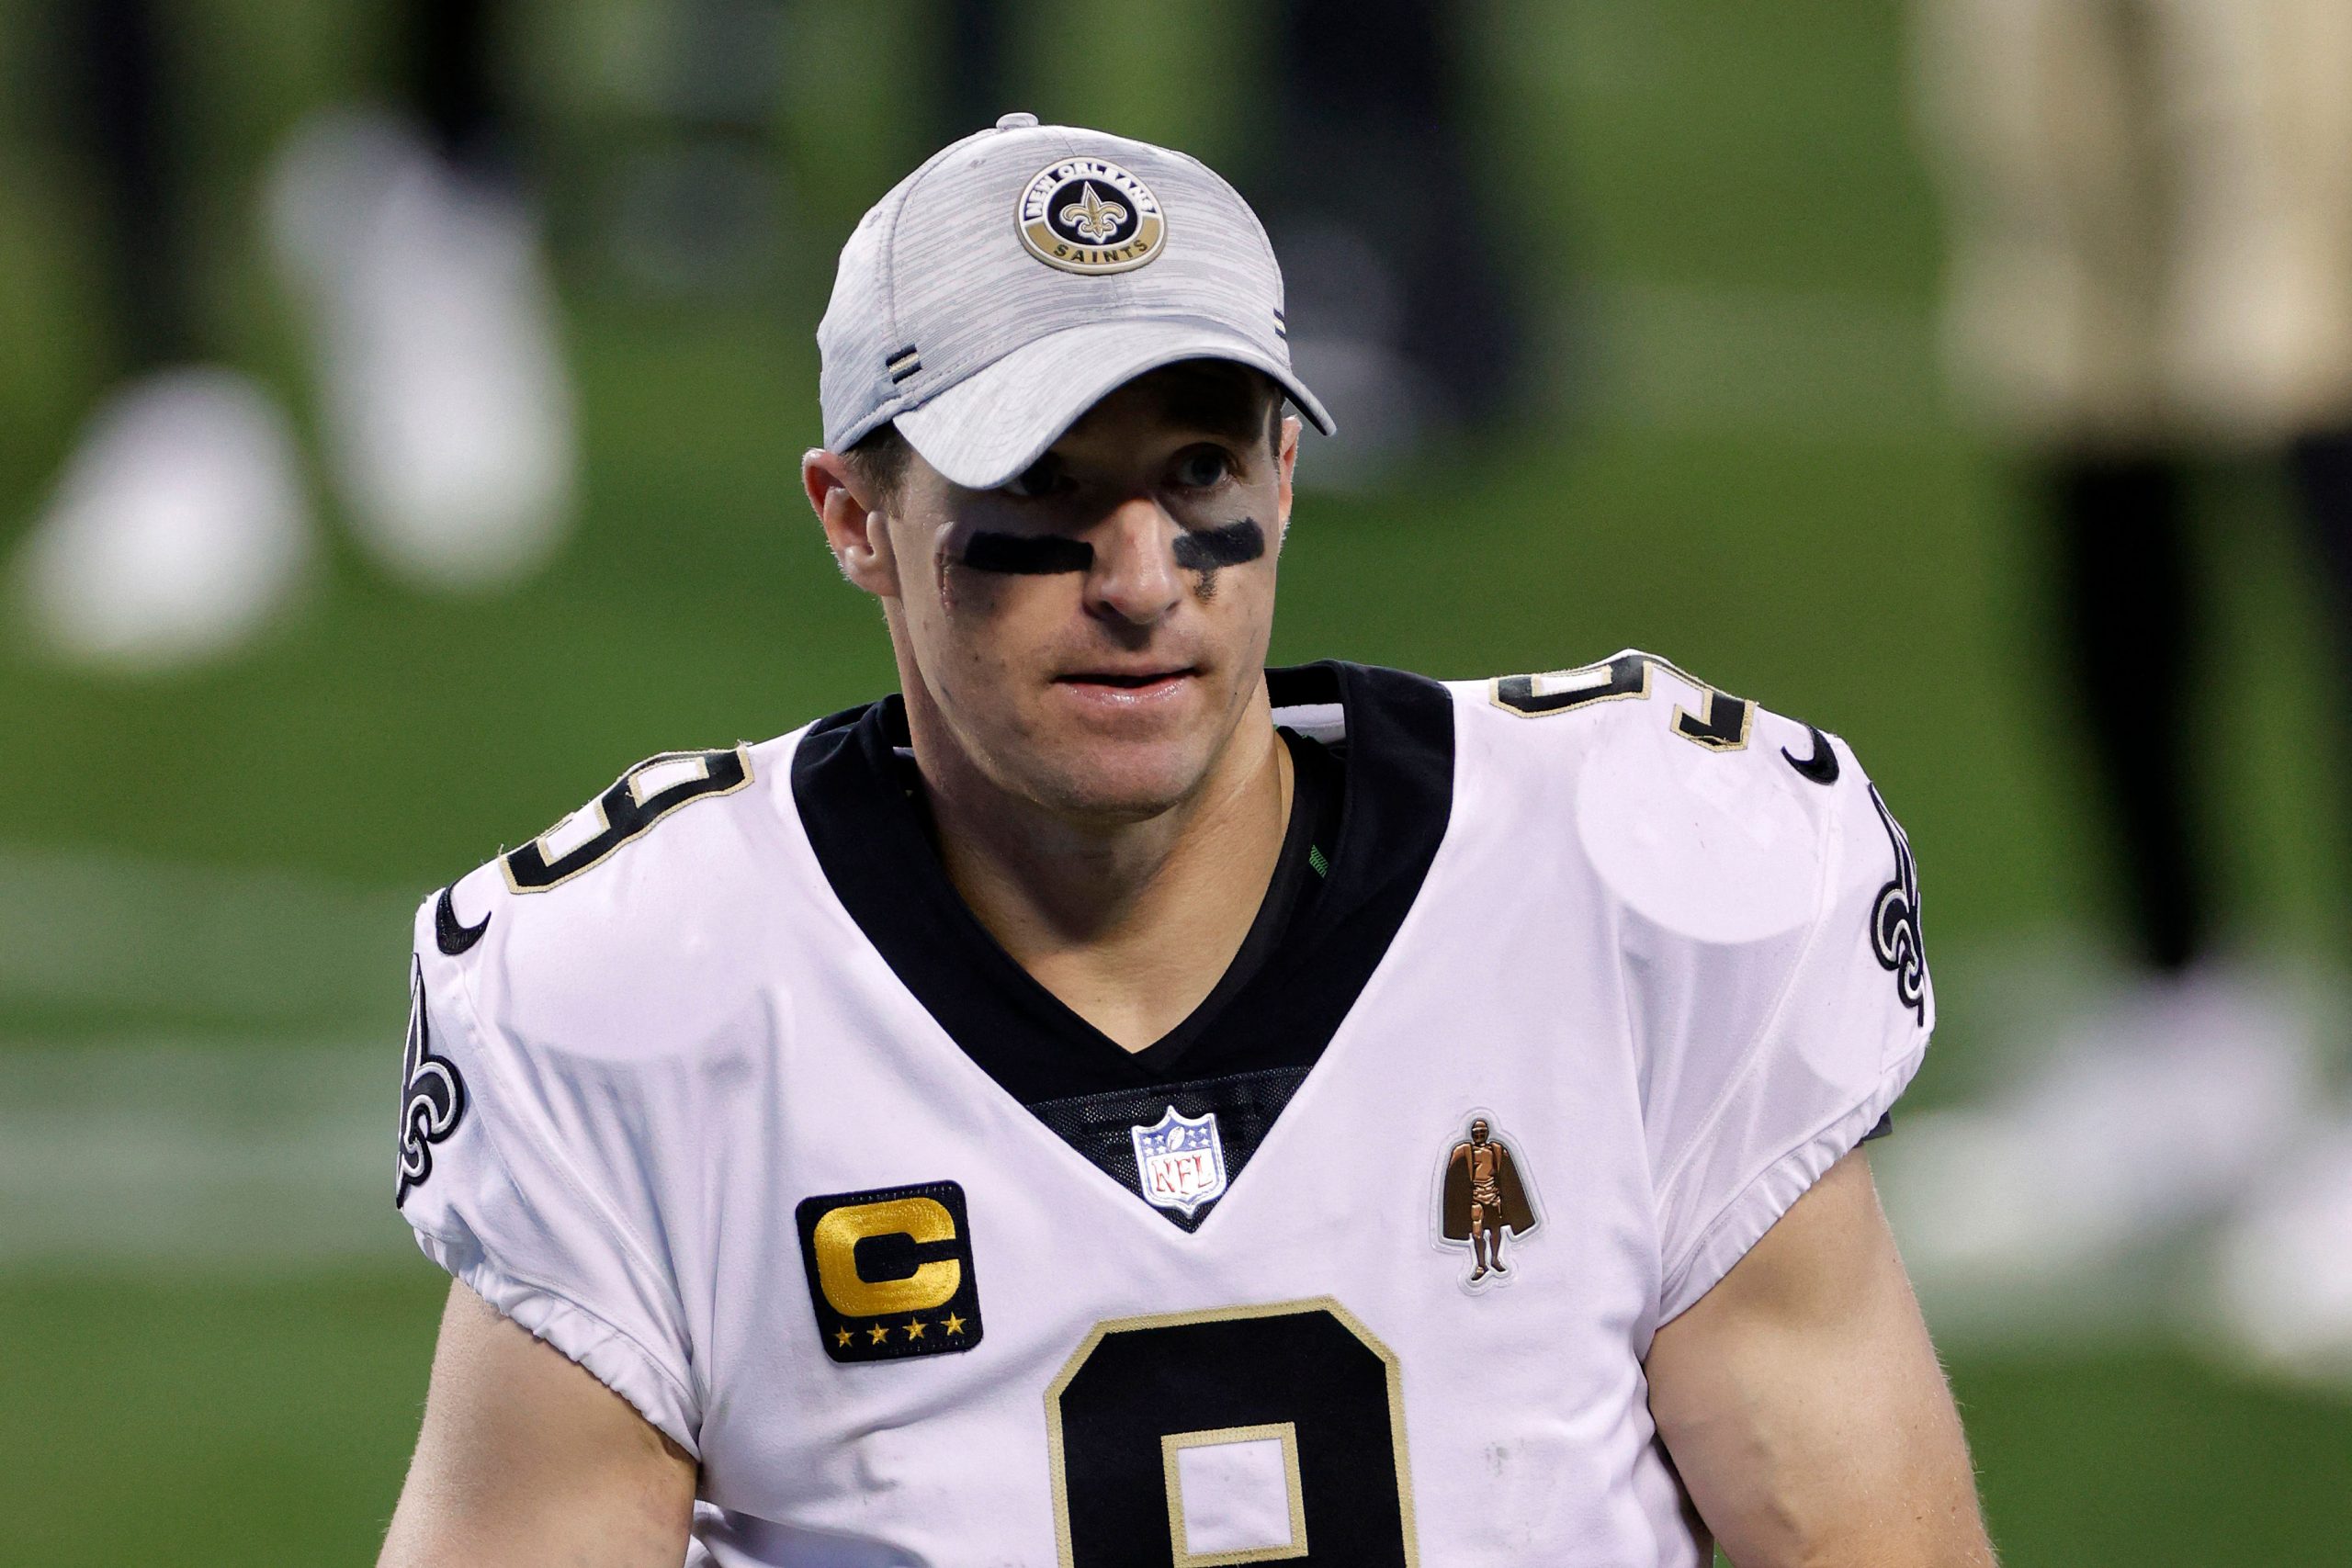 NFL star Drew Brees announces retirement from the game